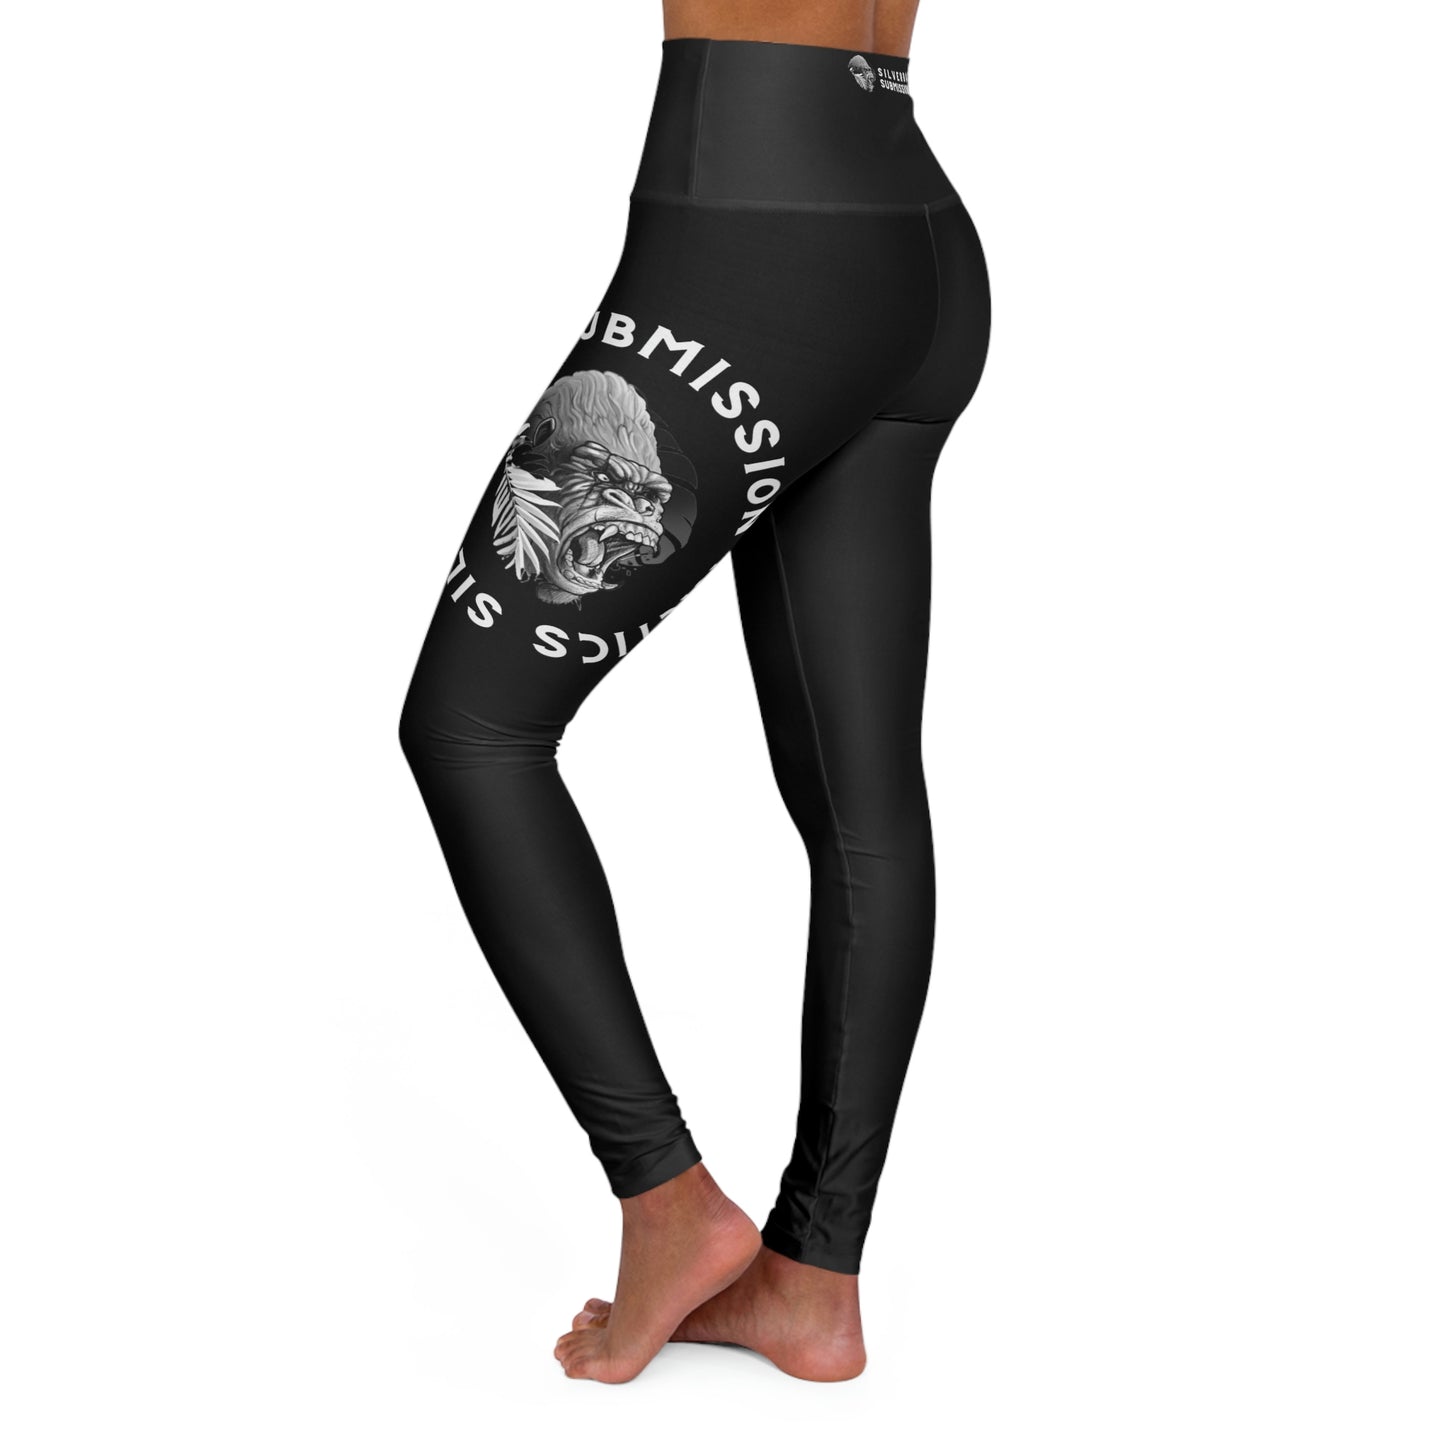 High Waisted Silverback Submission Tactics Yoga Leggings